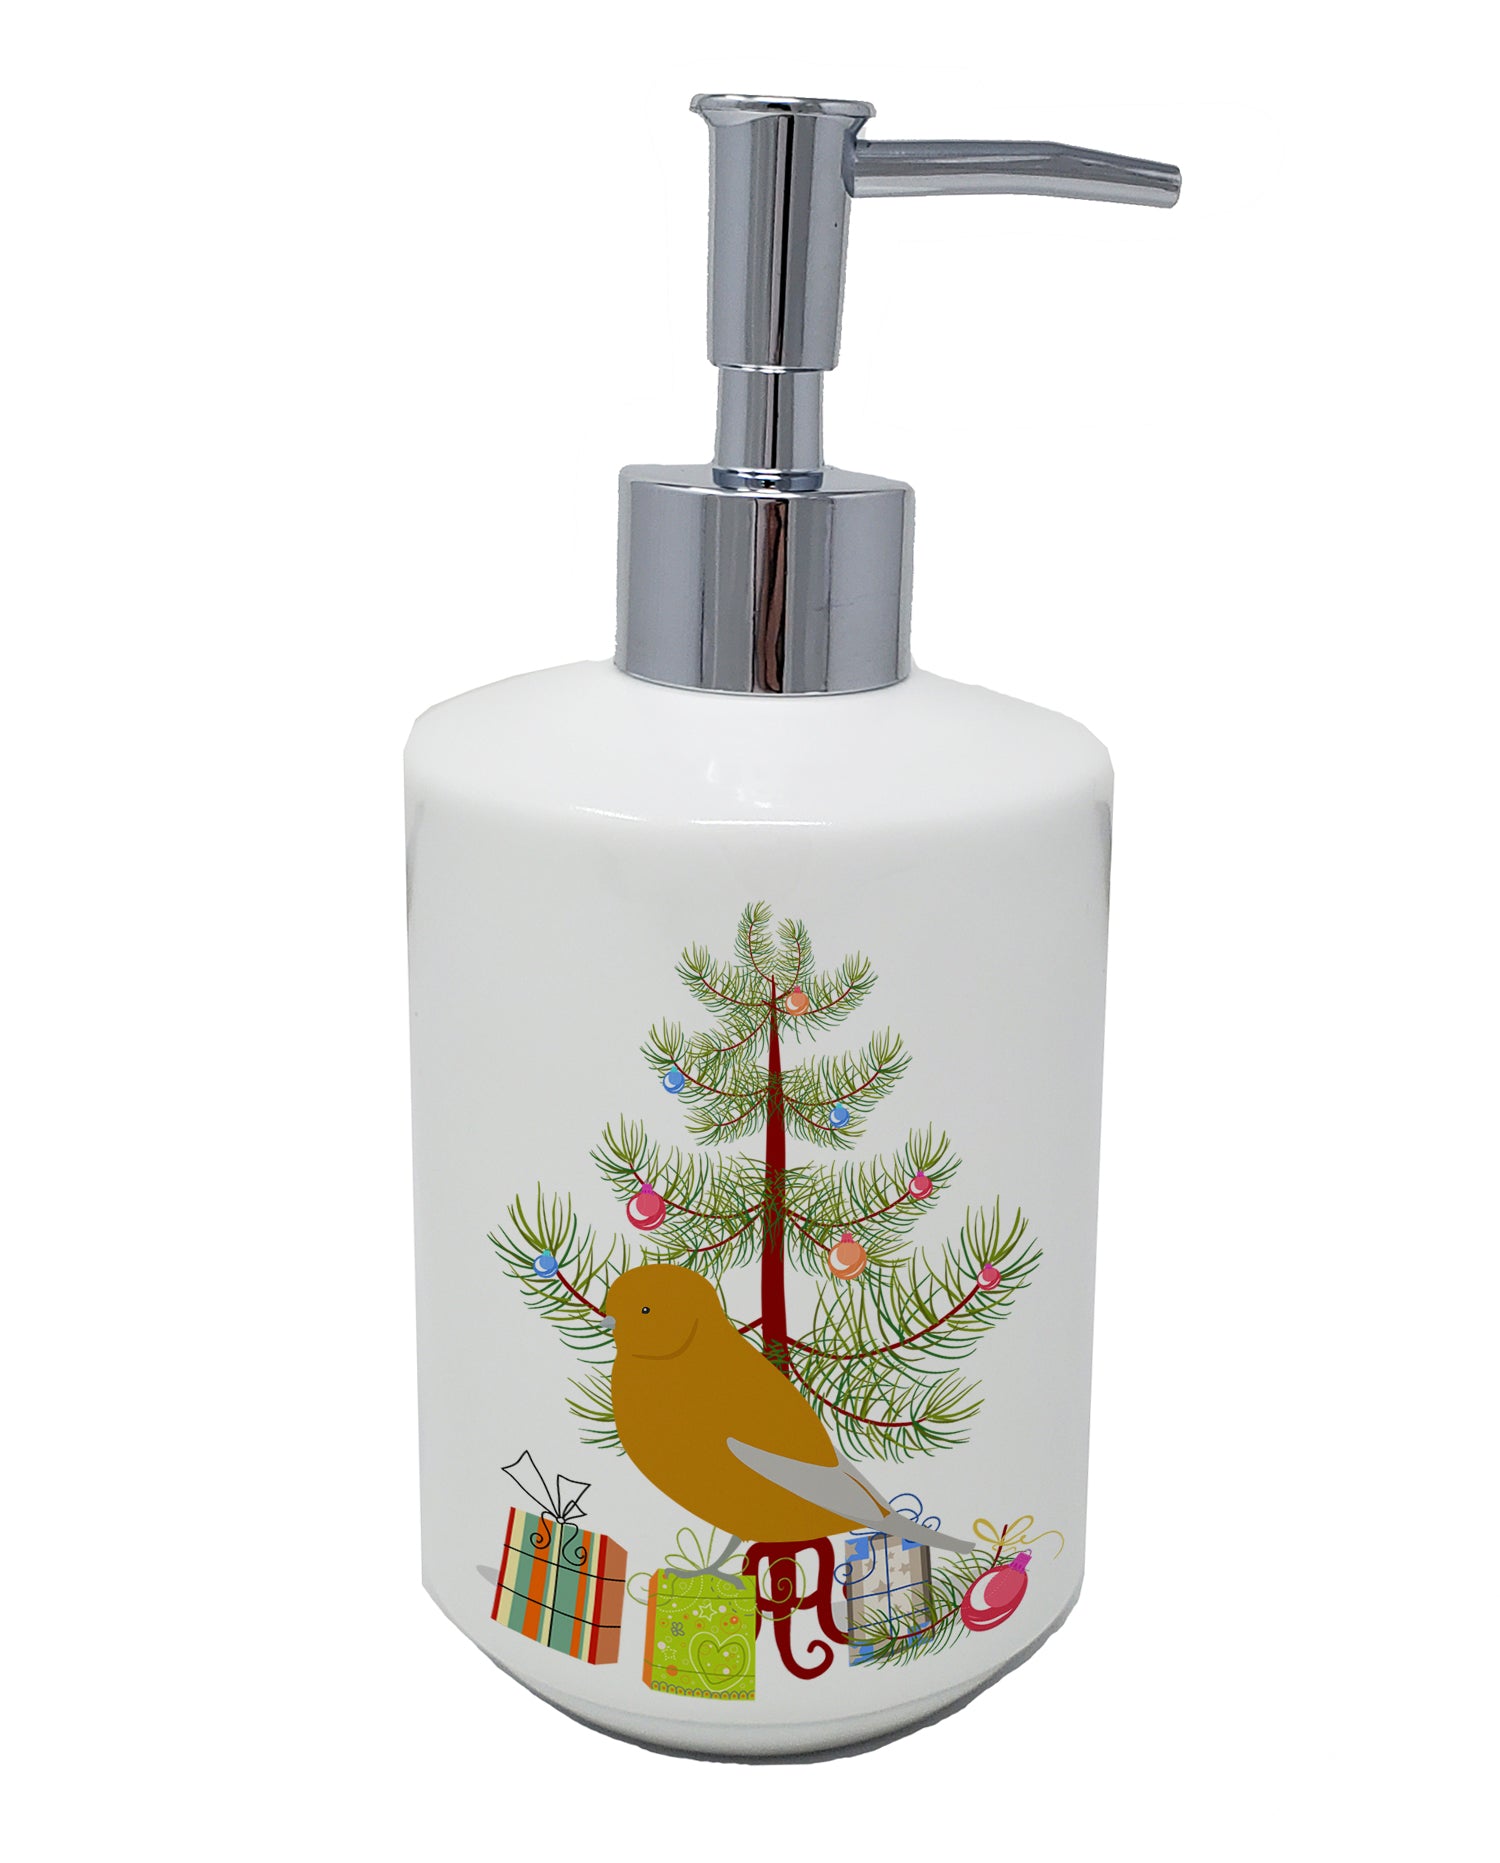 Buy this Norwich Canary Merry Christmas Ceramic Soap Dispenser